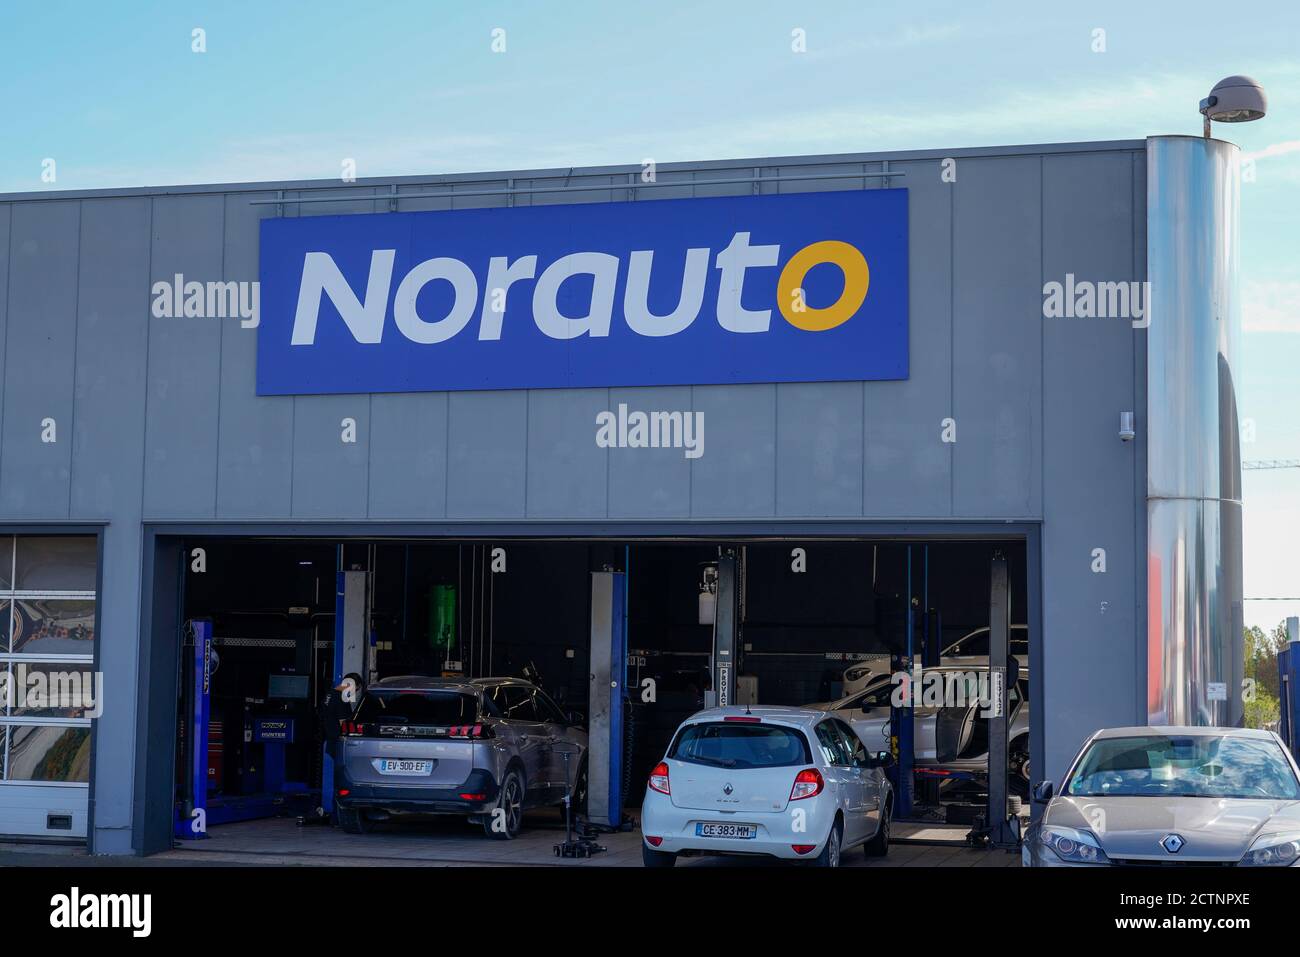 Bordeaux , Aquitaine / France - 09 20 2020 : Norauto logo and sign text front of station garage shop french store Automotive Repair and Spare Parts Stock Photo